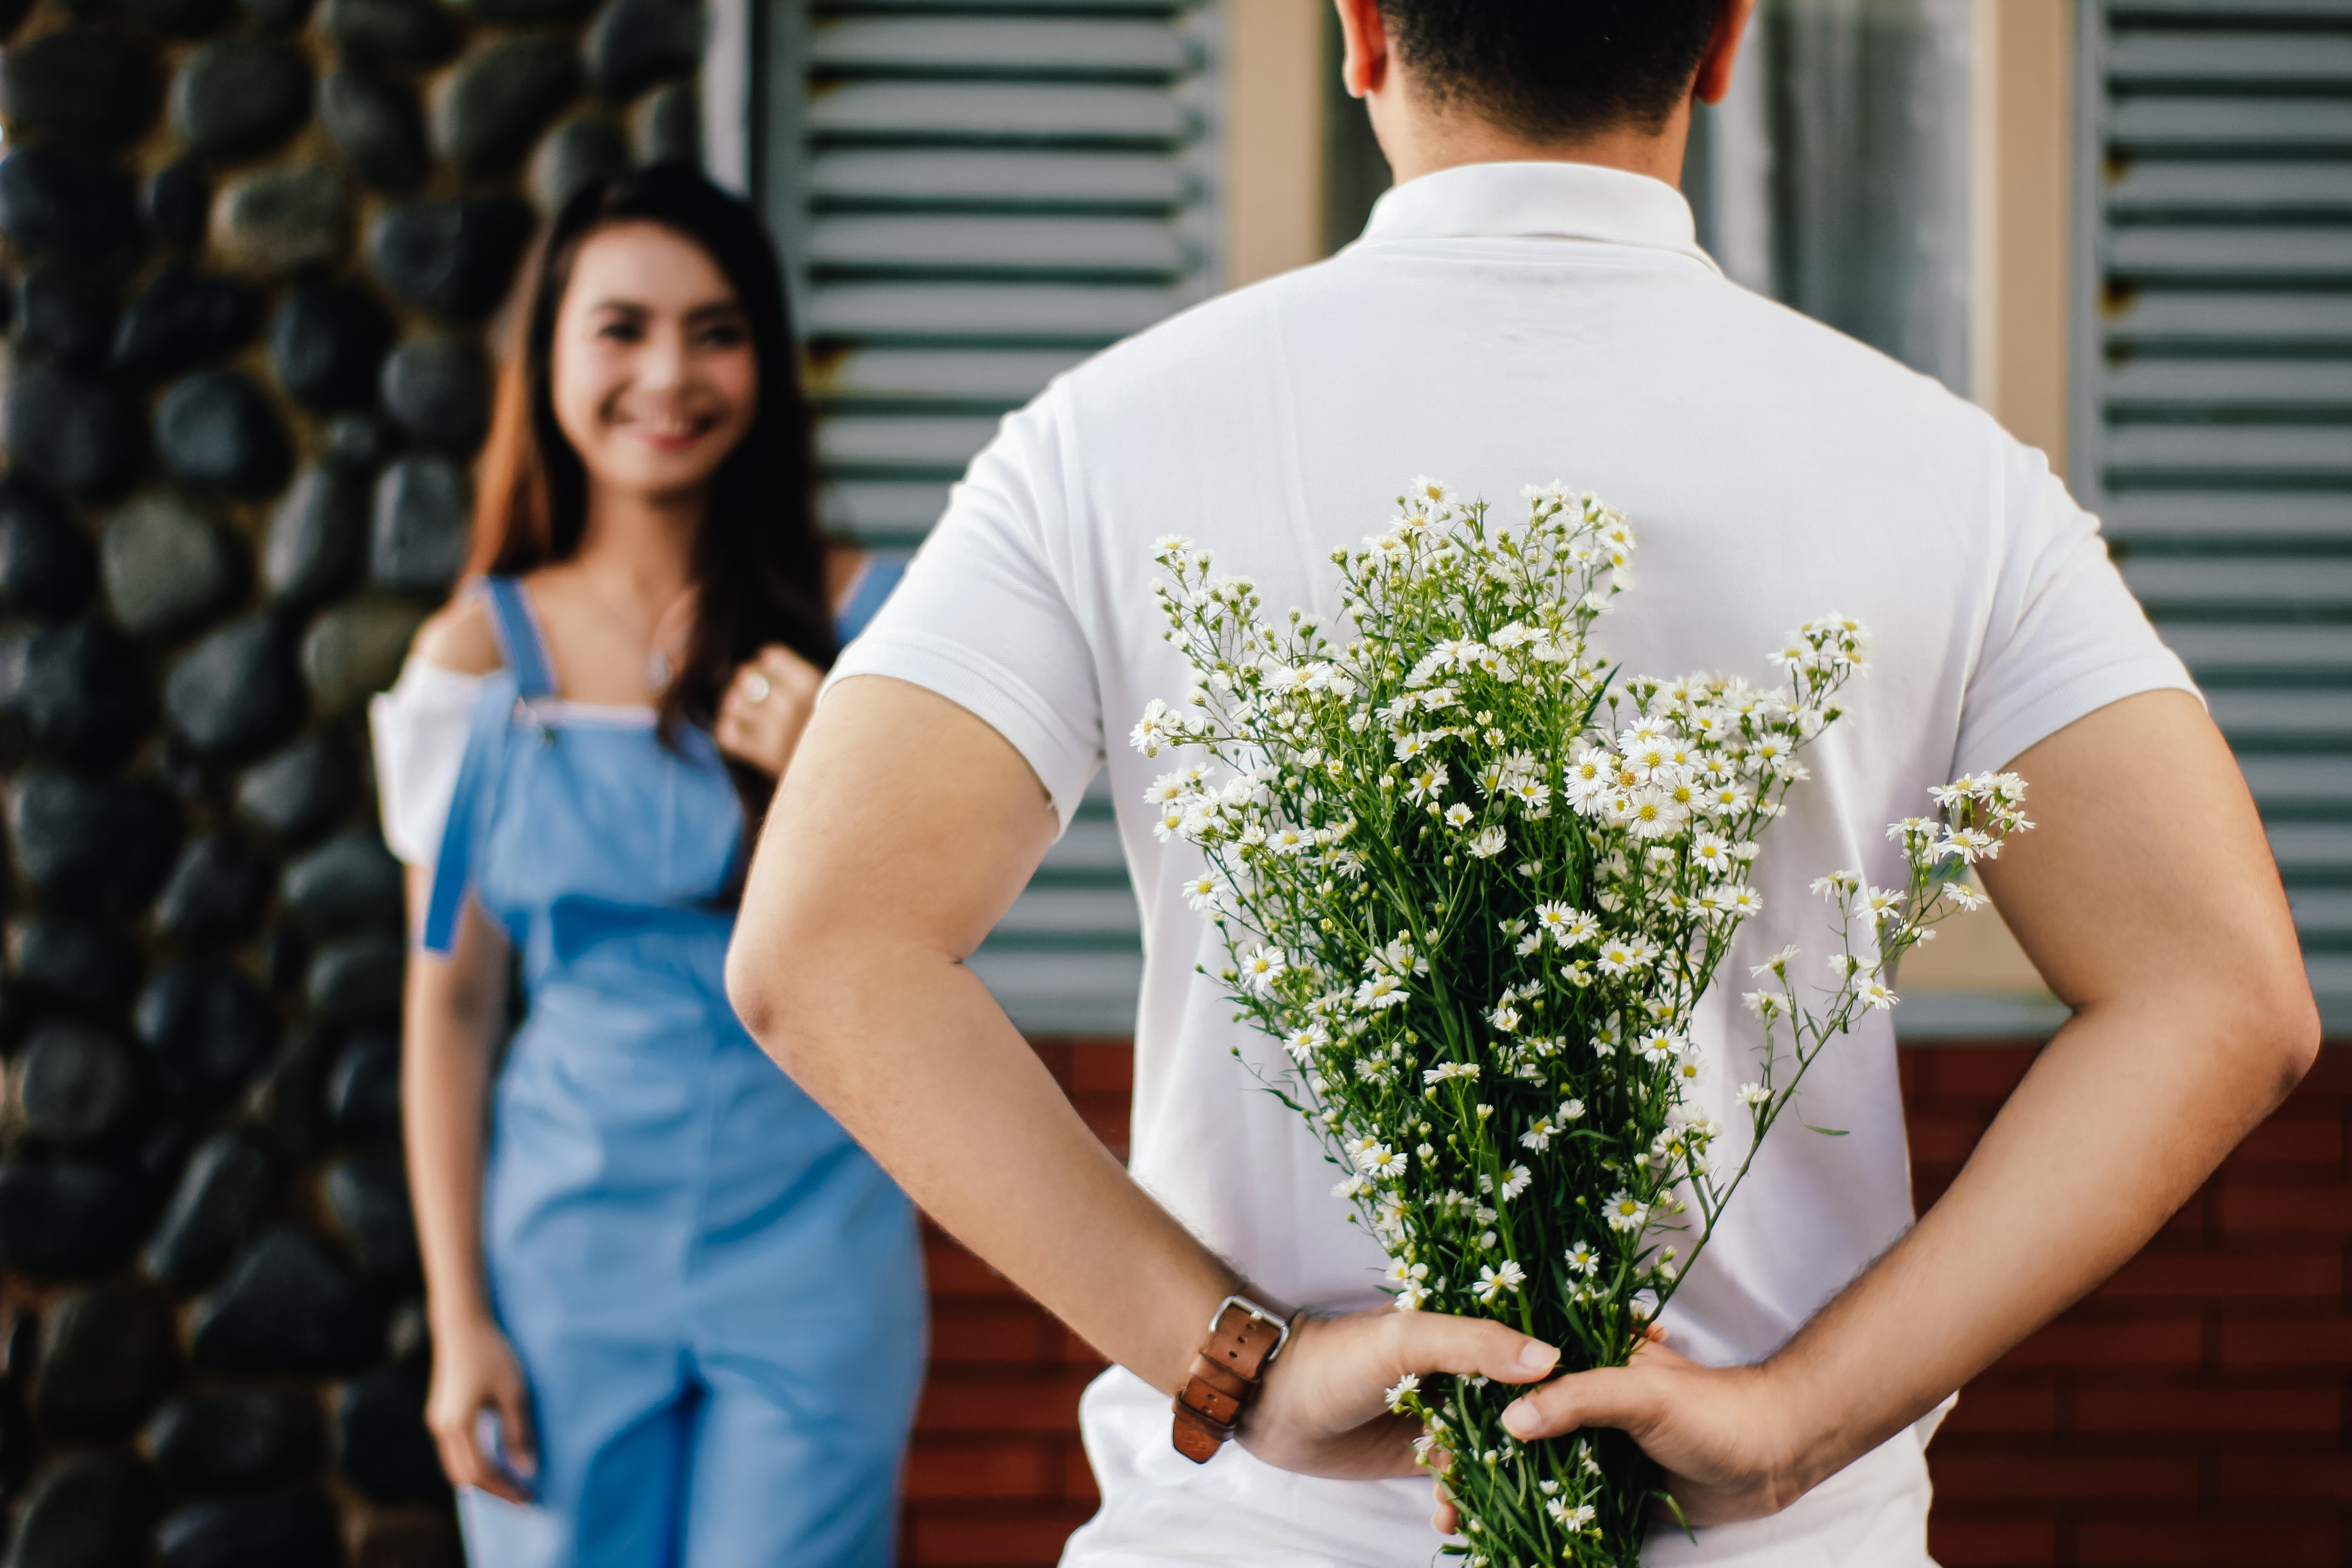 Man Holding Baby's-breath Flower in Front of Woman Standing Near Marble Wall. | Source: Pexels